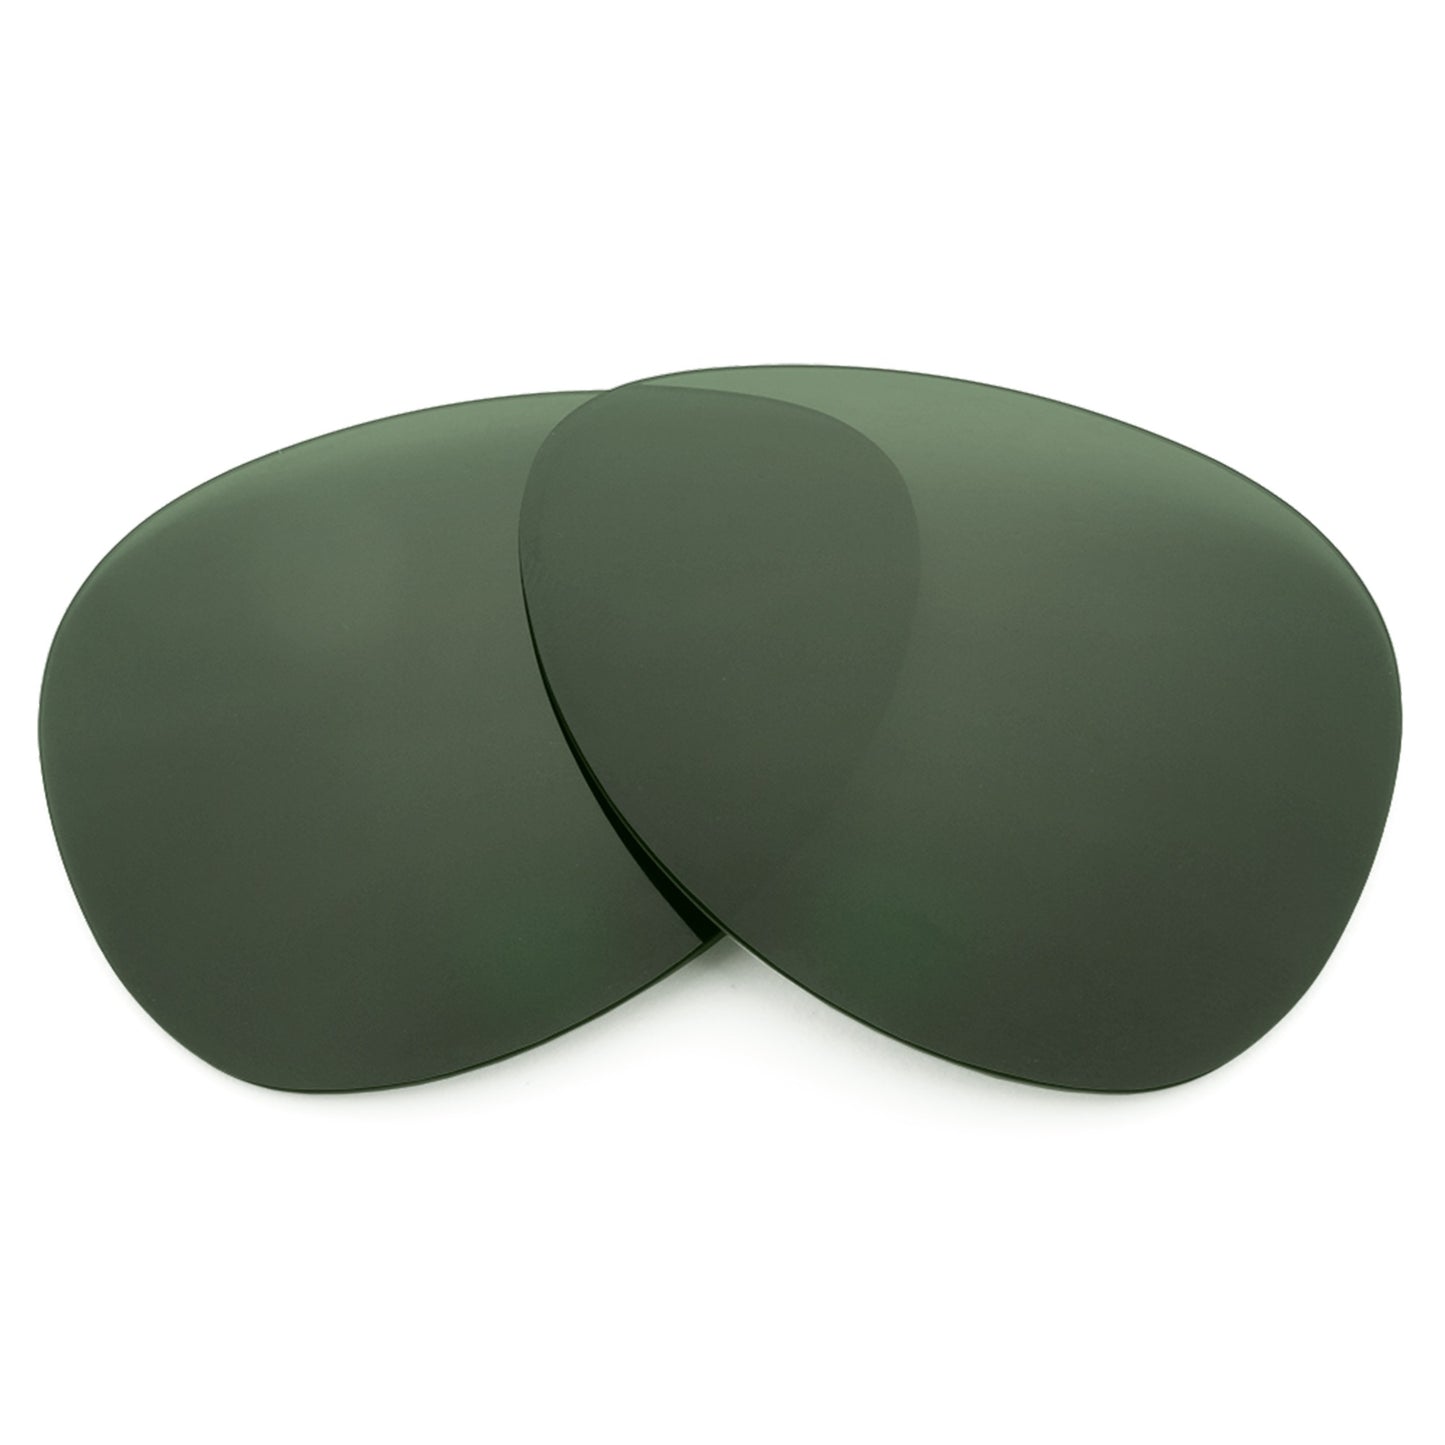 Revant replacement lenses for Ray-Ban Folding Aviator RB3479 55mm Non-Polarized Gray Green